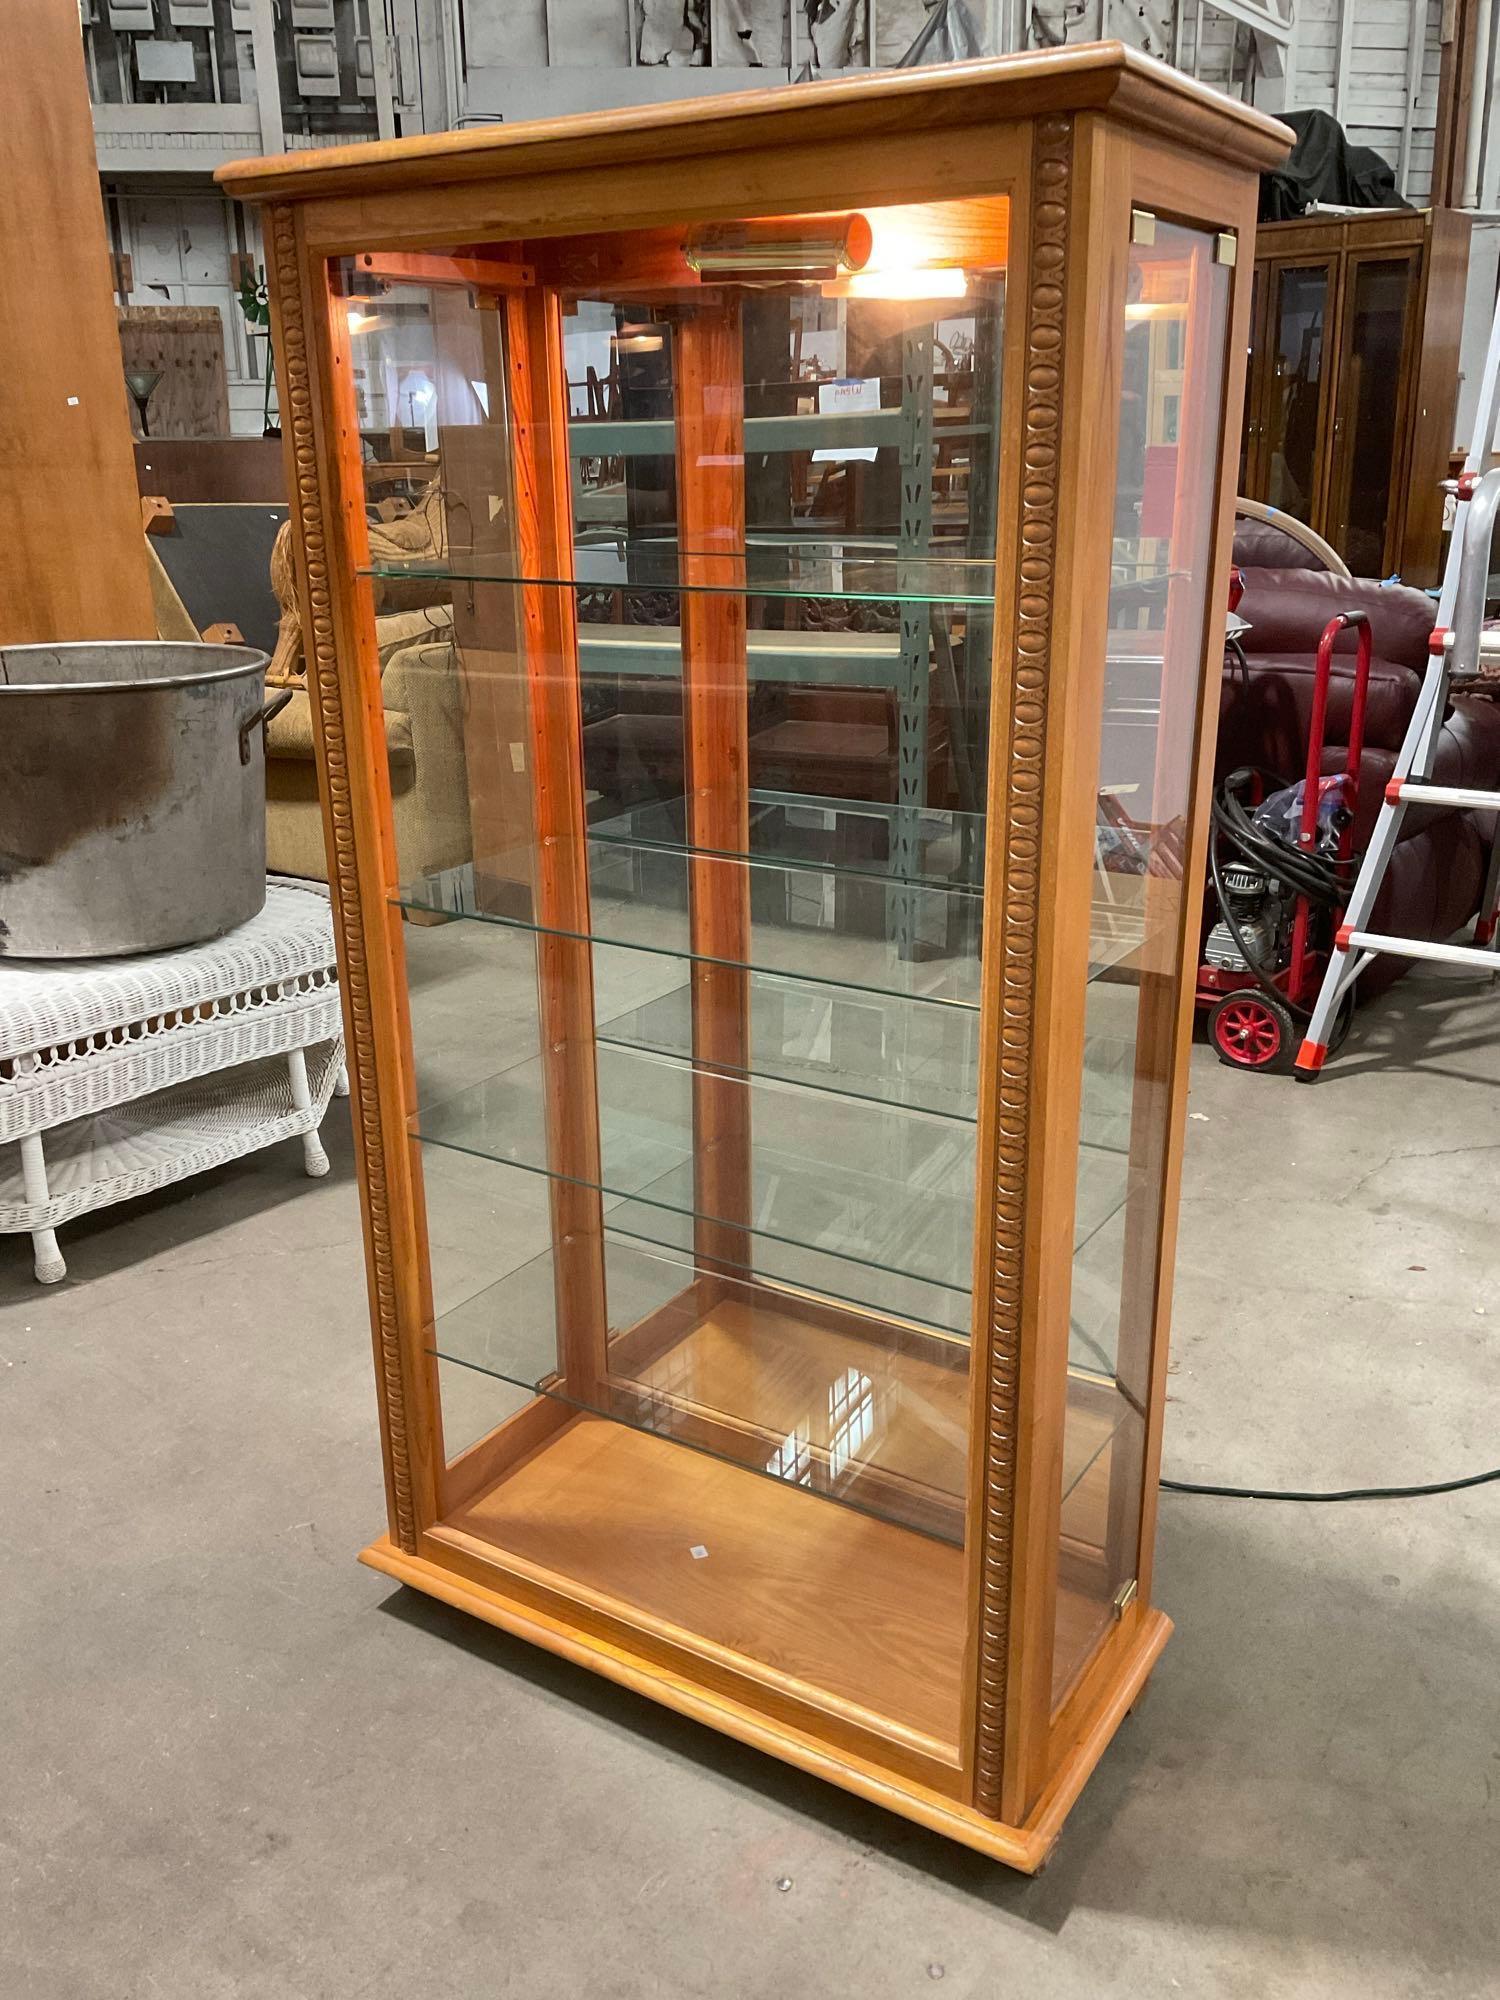 Vintage Illuminated Wooden Glass Fronted Display Cabinet w/ 4 Glass Shelves. Tested, Works. See